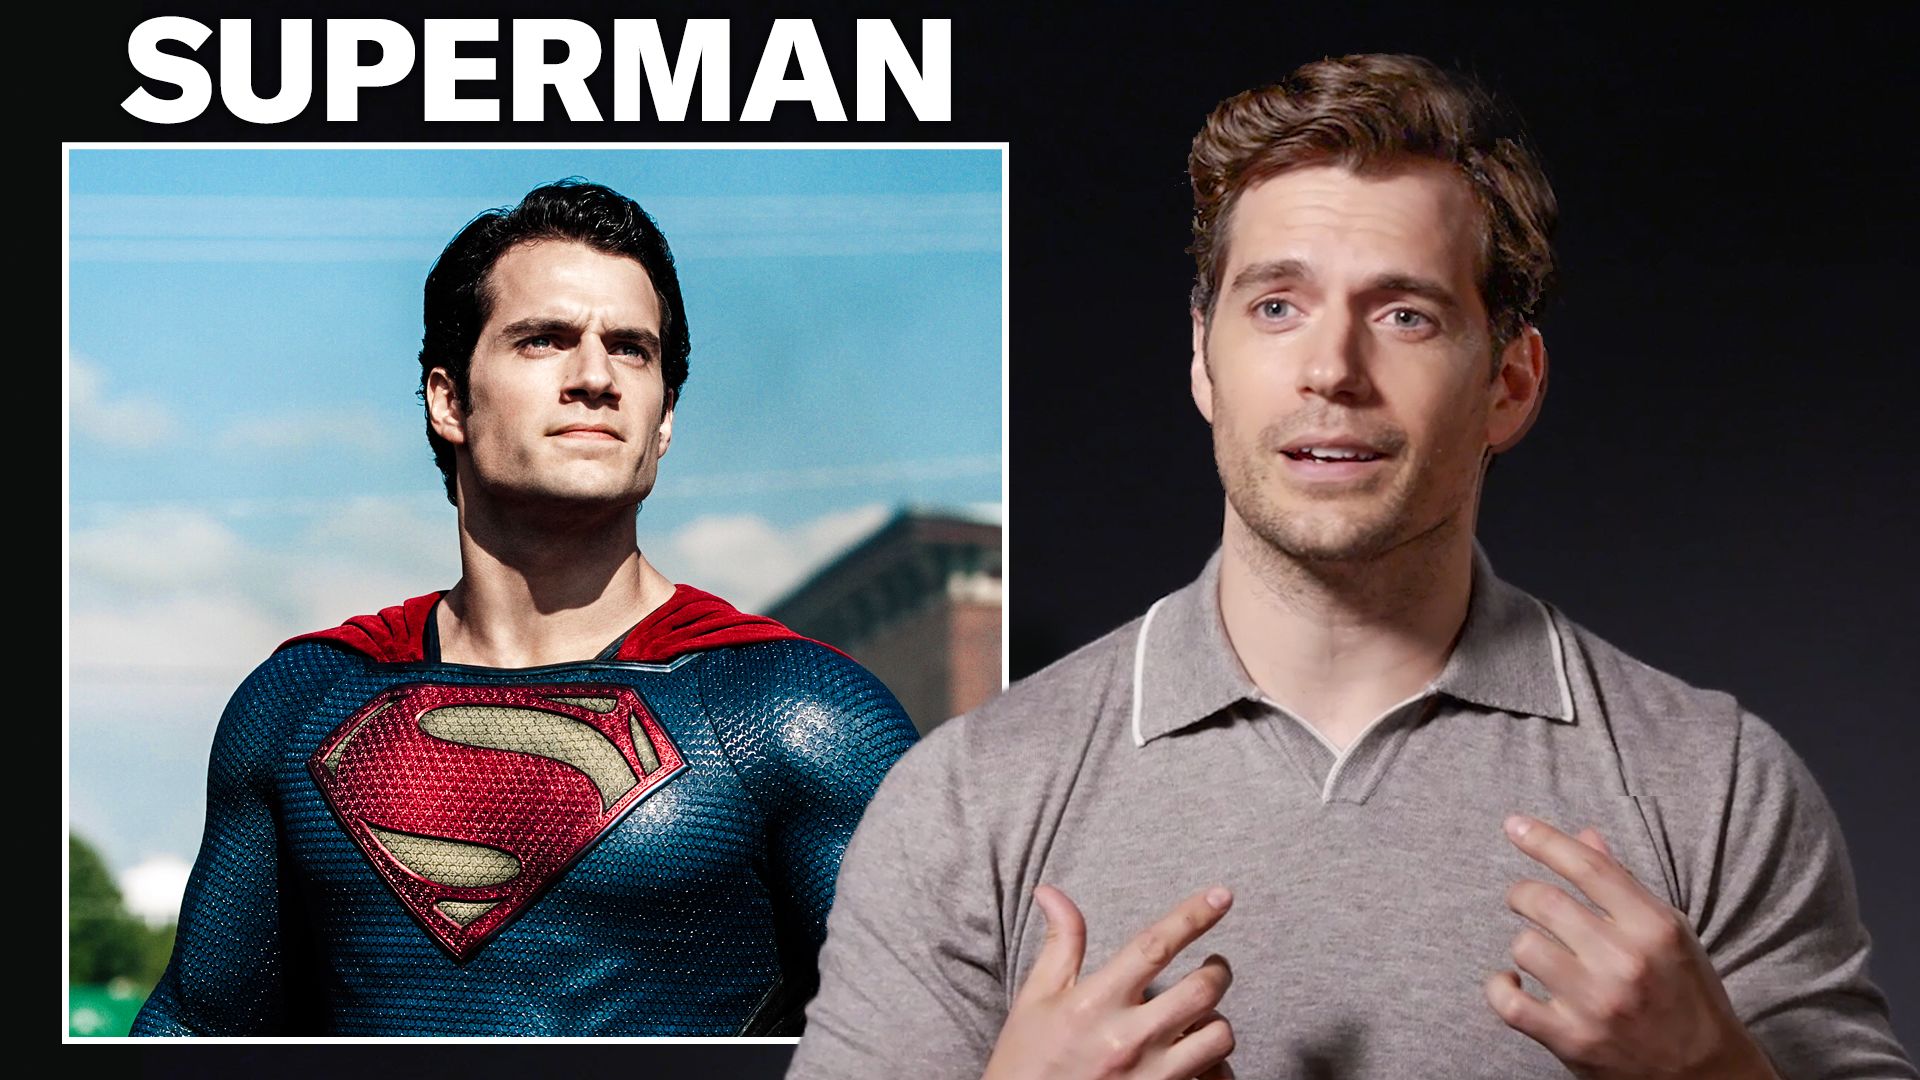 Dany Garcia and Henry Cavill Editorial Photo - Image of actors